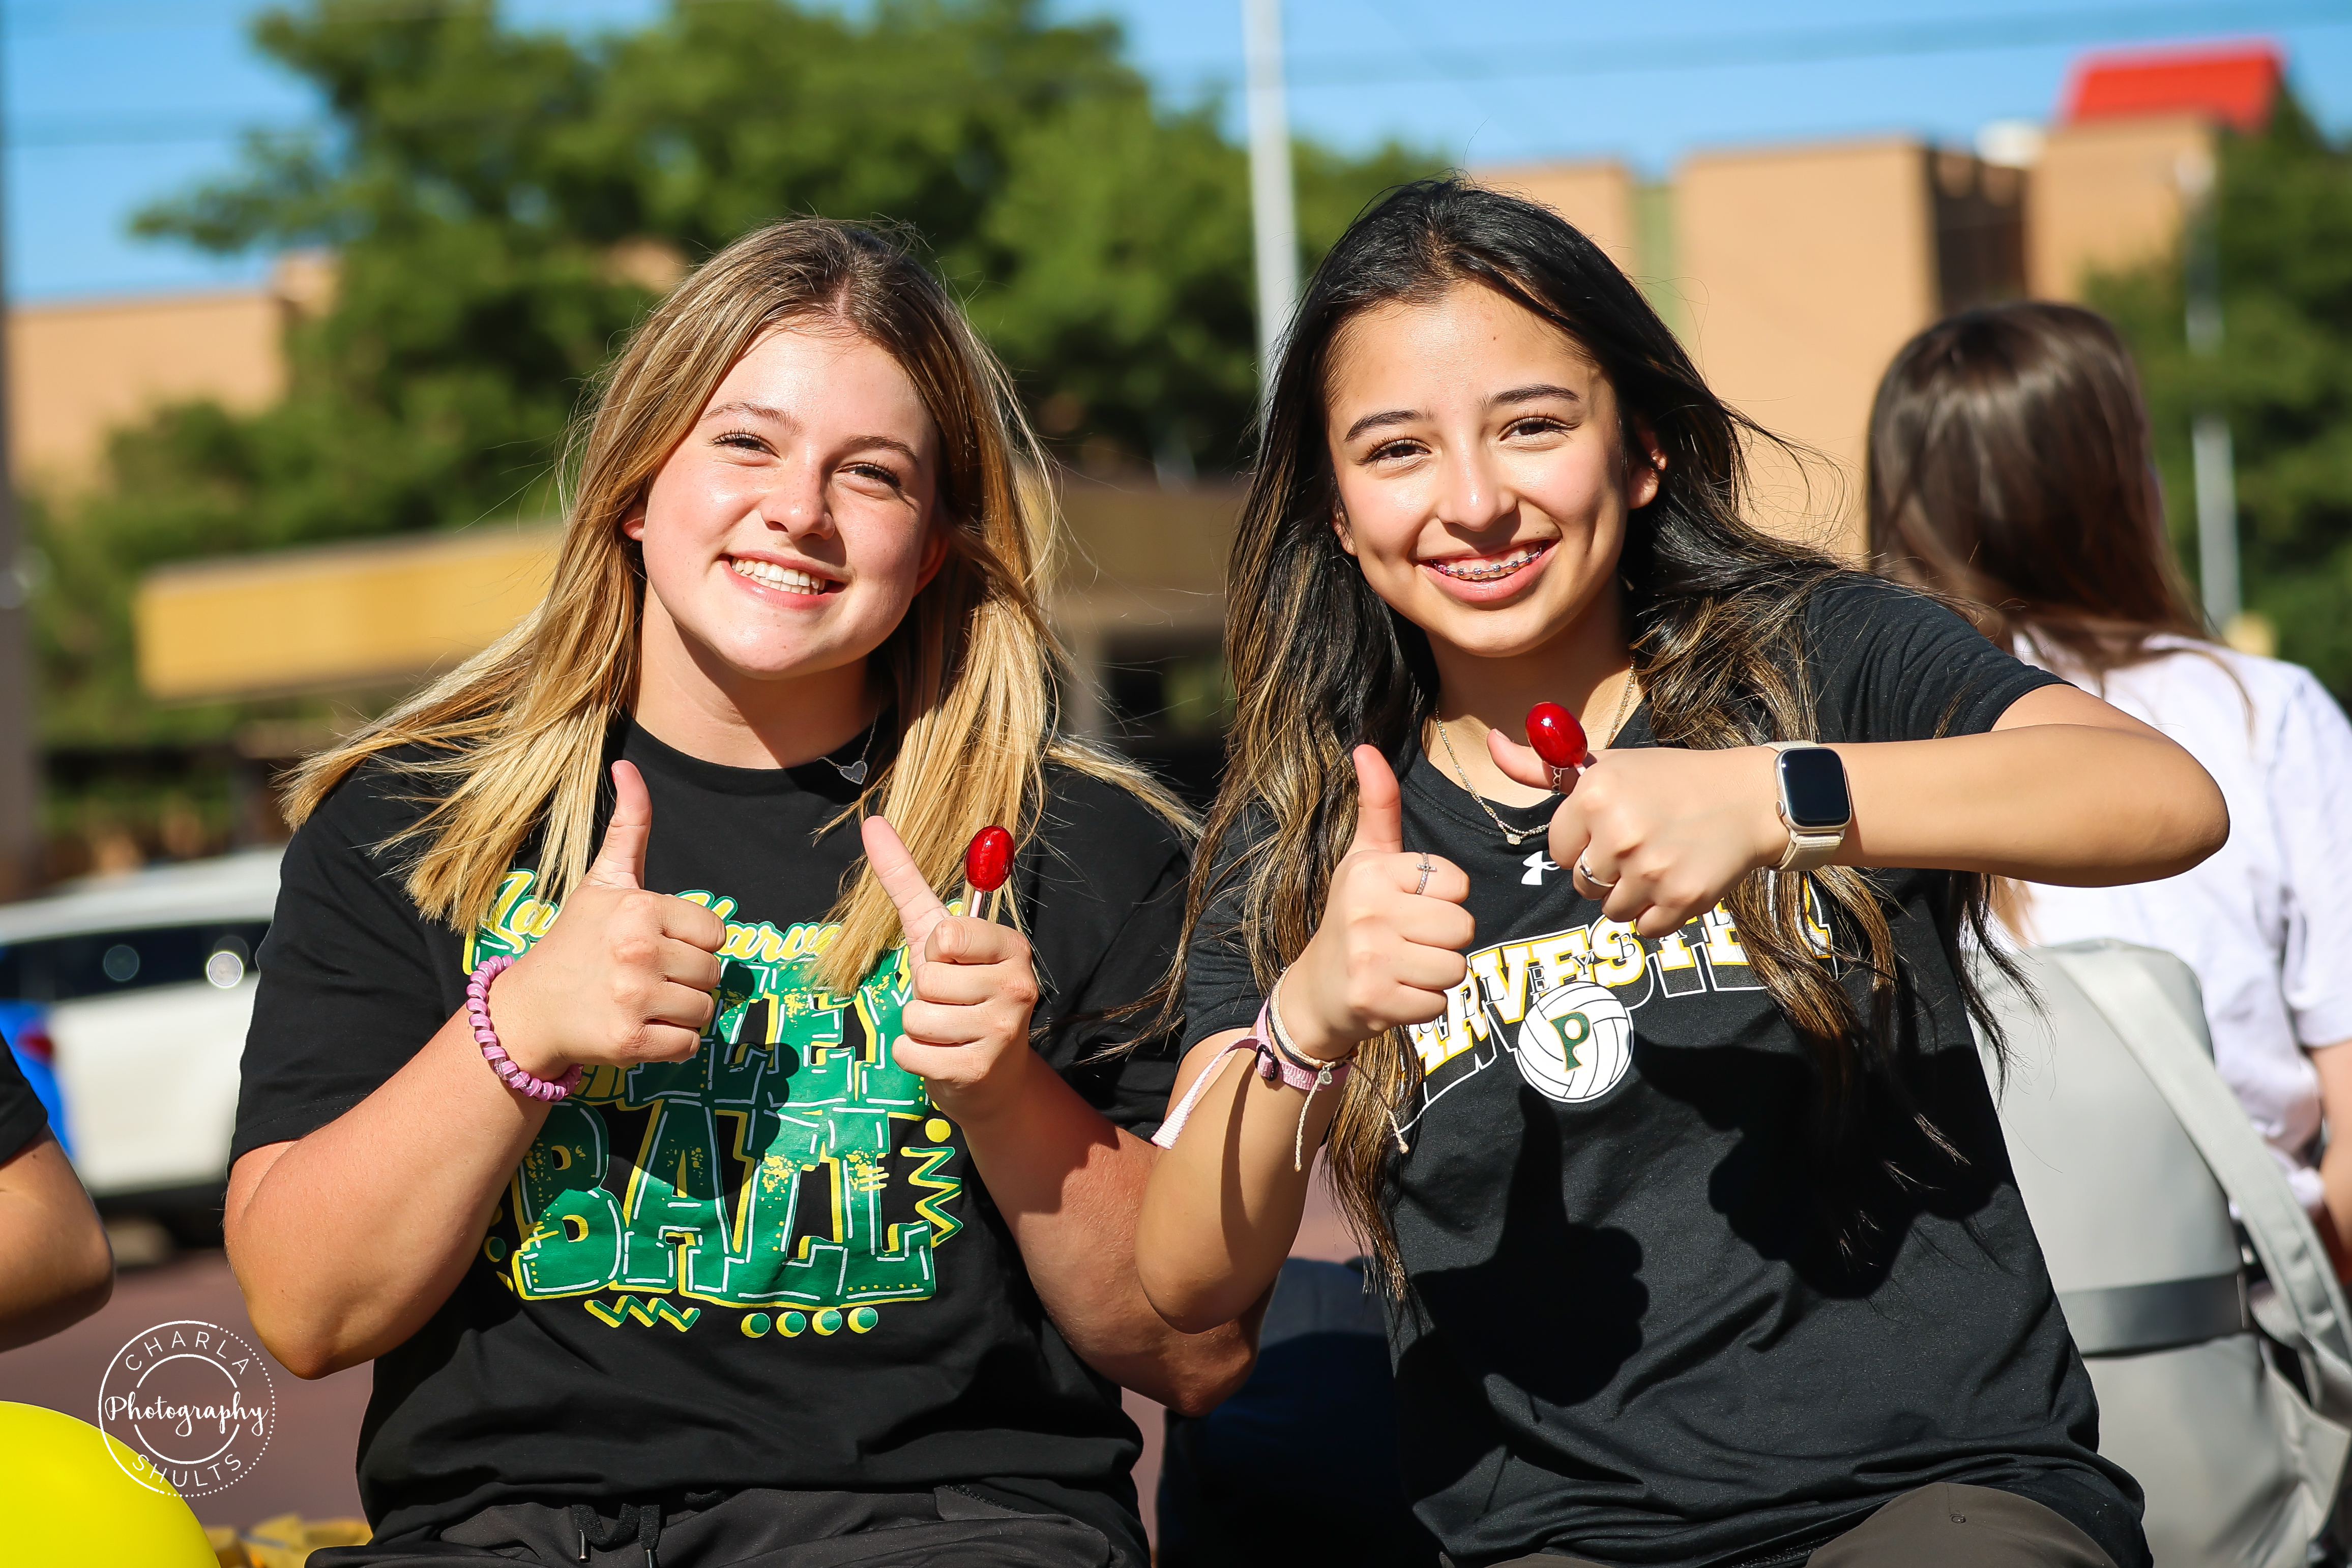 Two High school giving a thumbs up